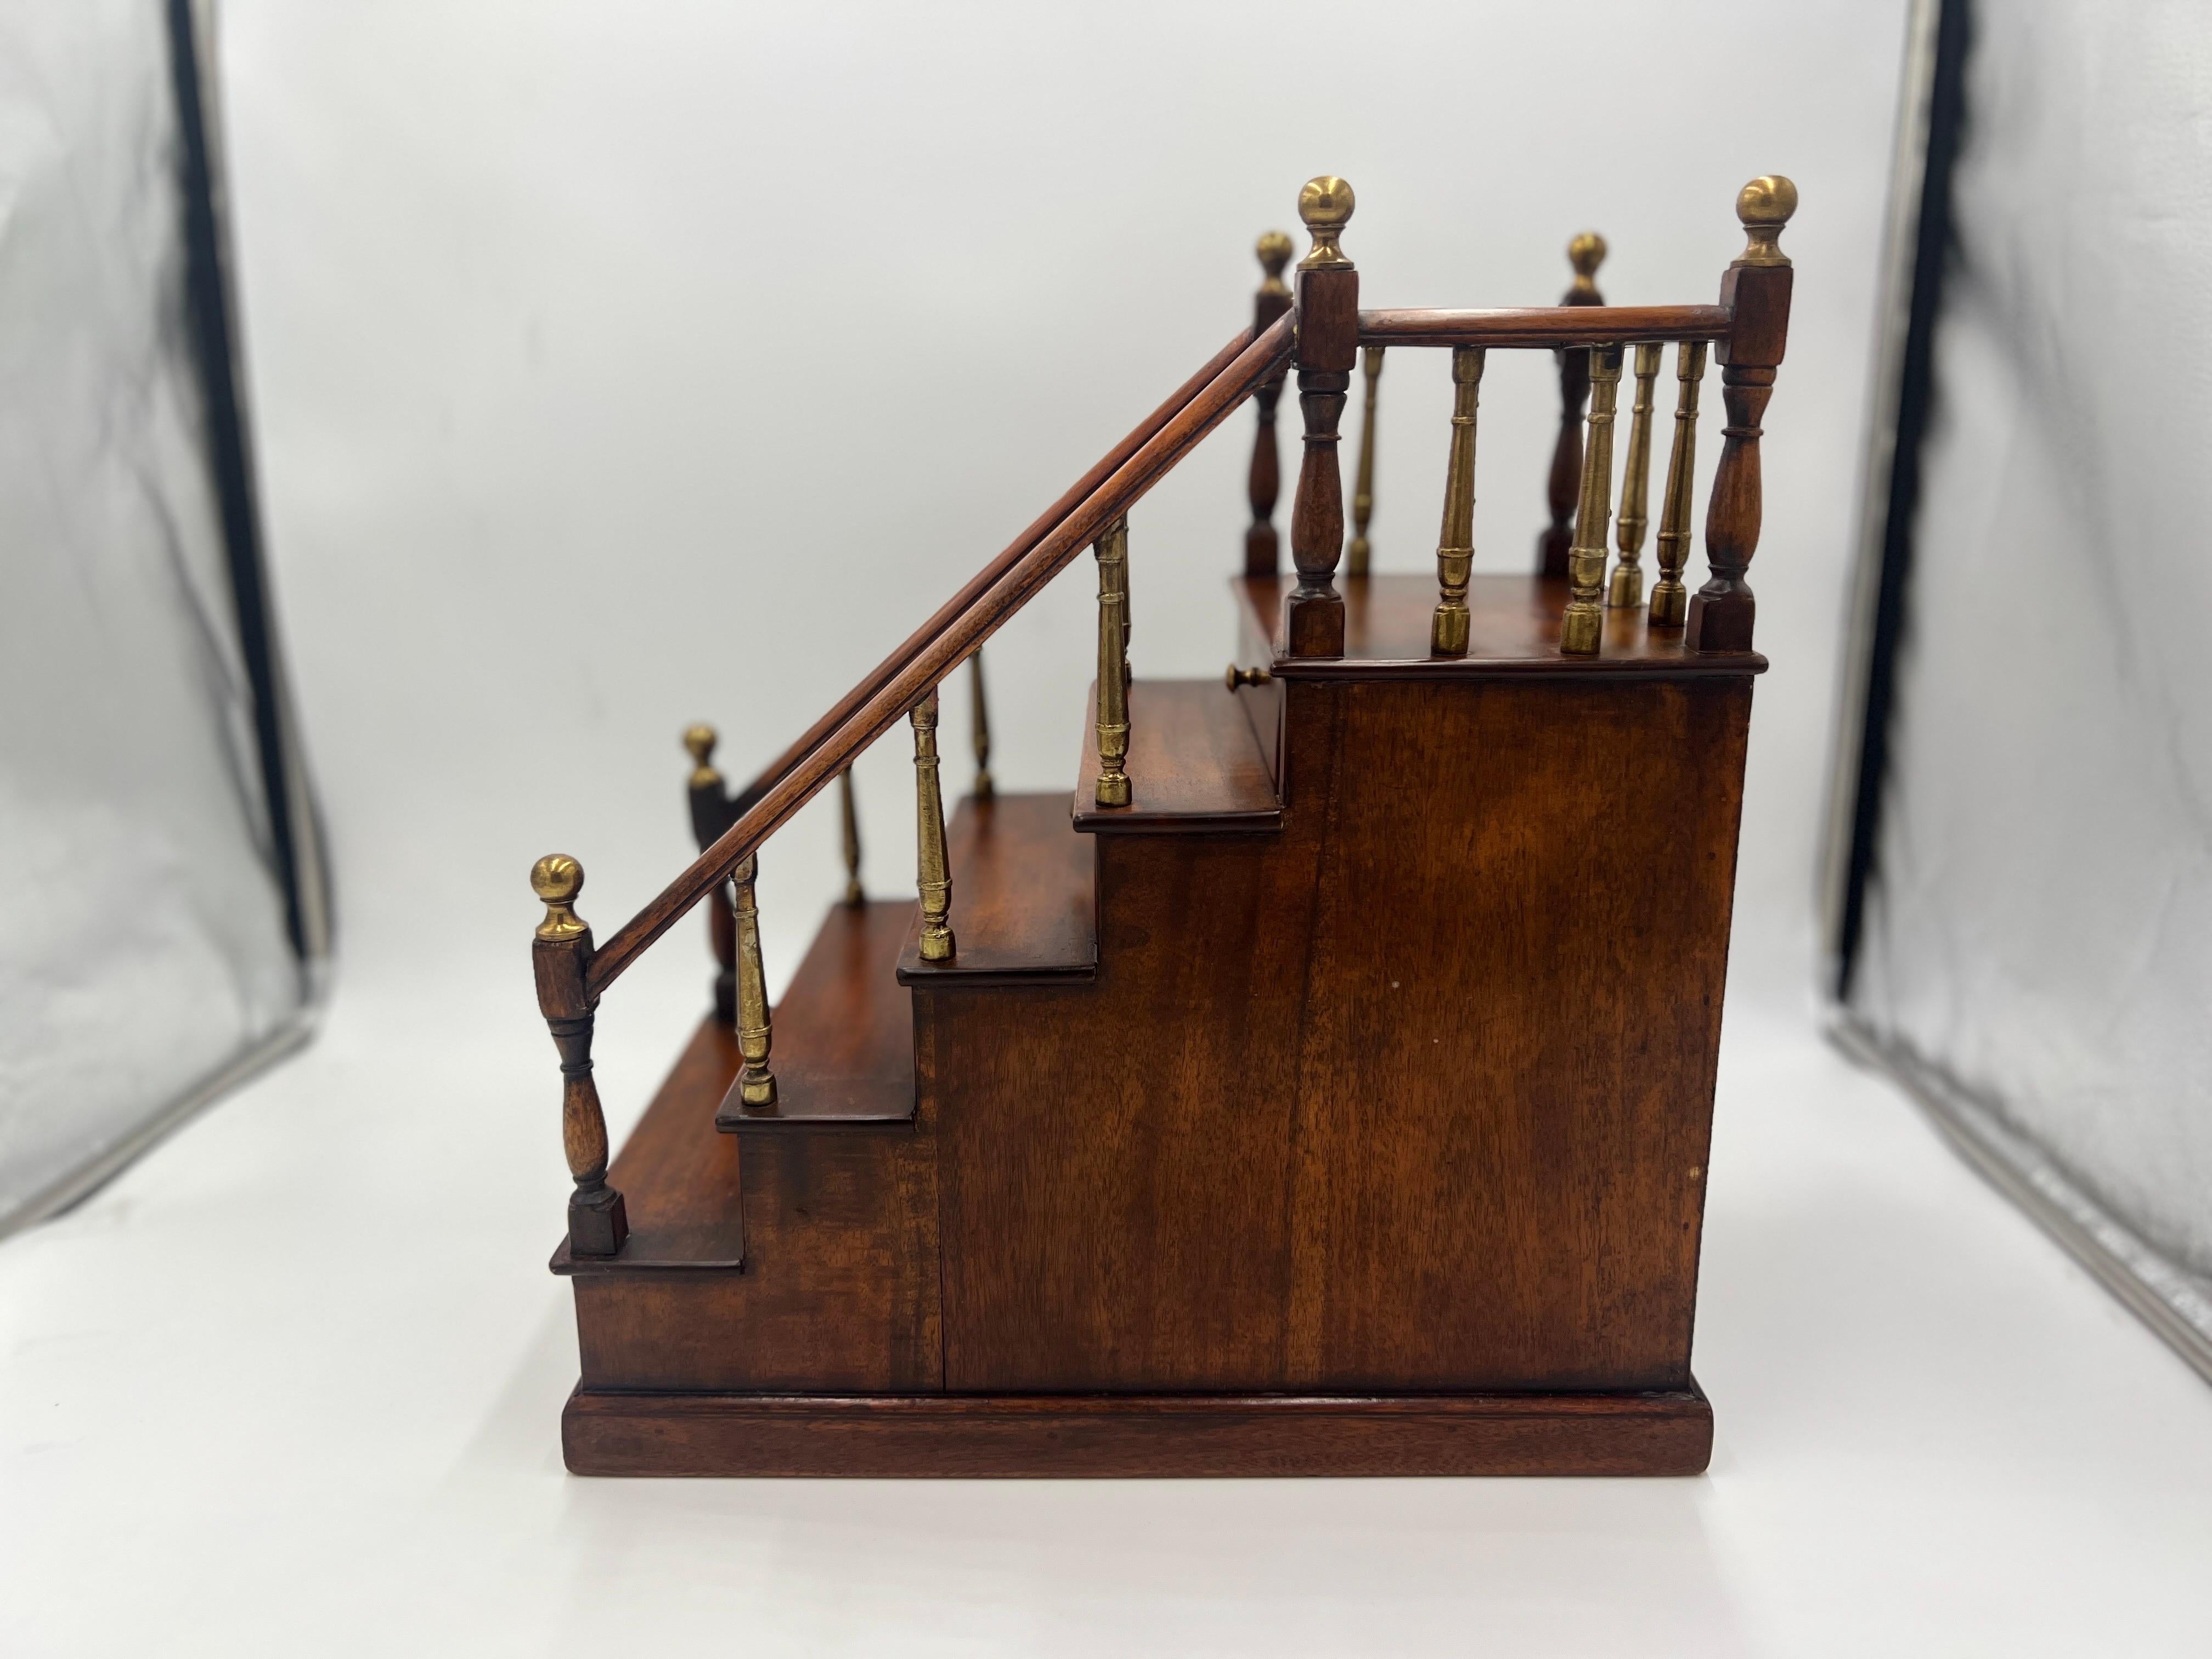 Antique Edwardian Mahogany Staircase Model with Brass Finial Newel Posts For Sale 1